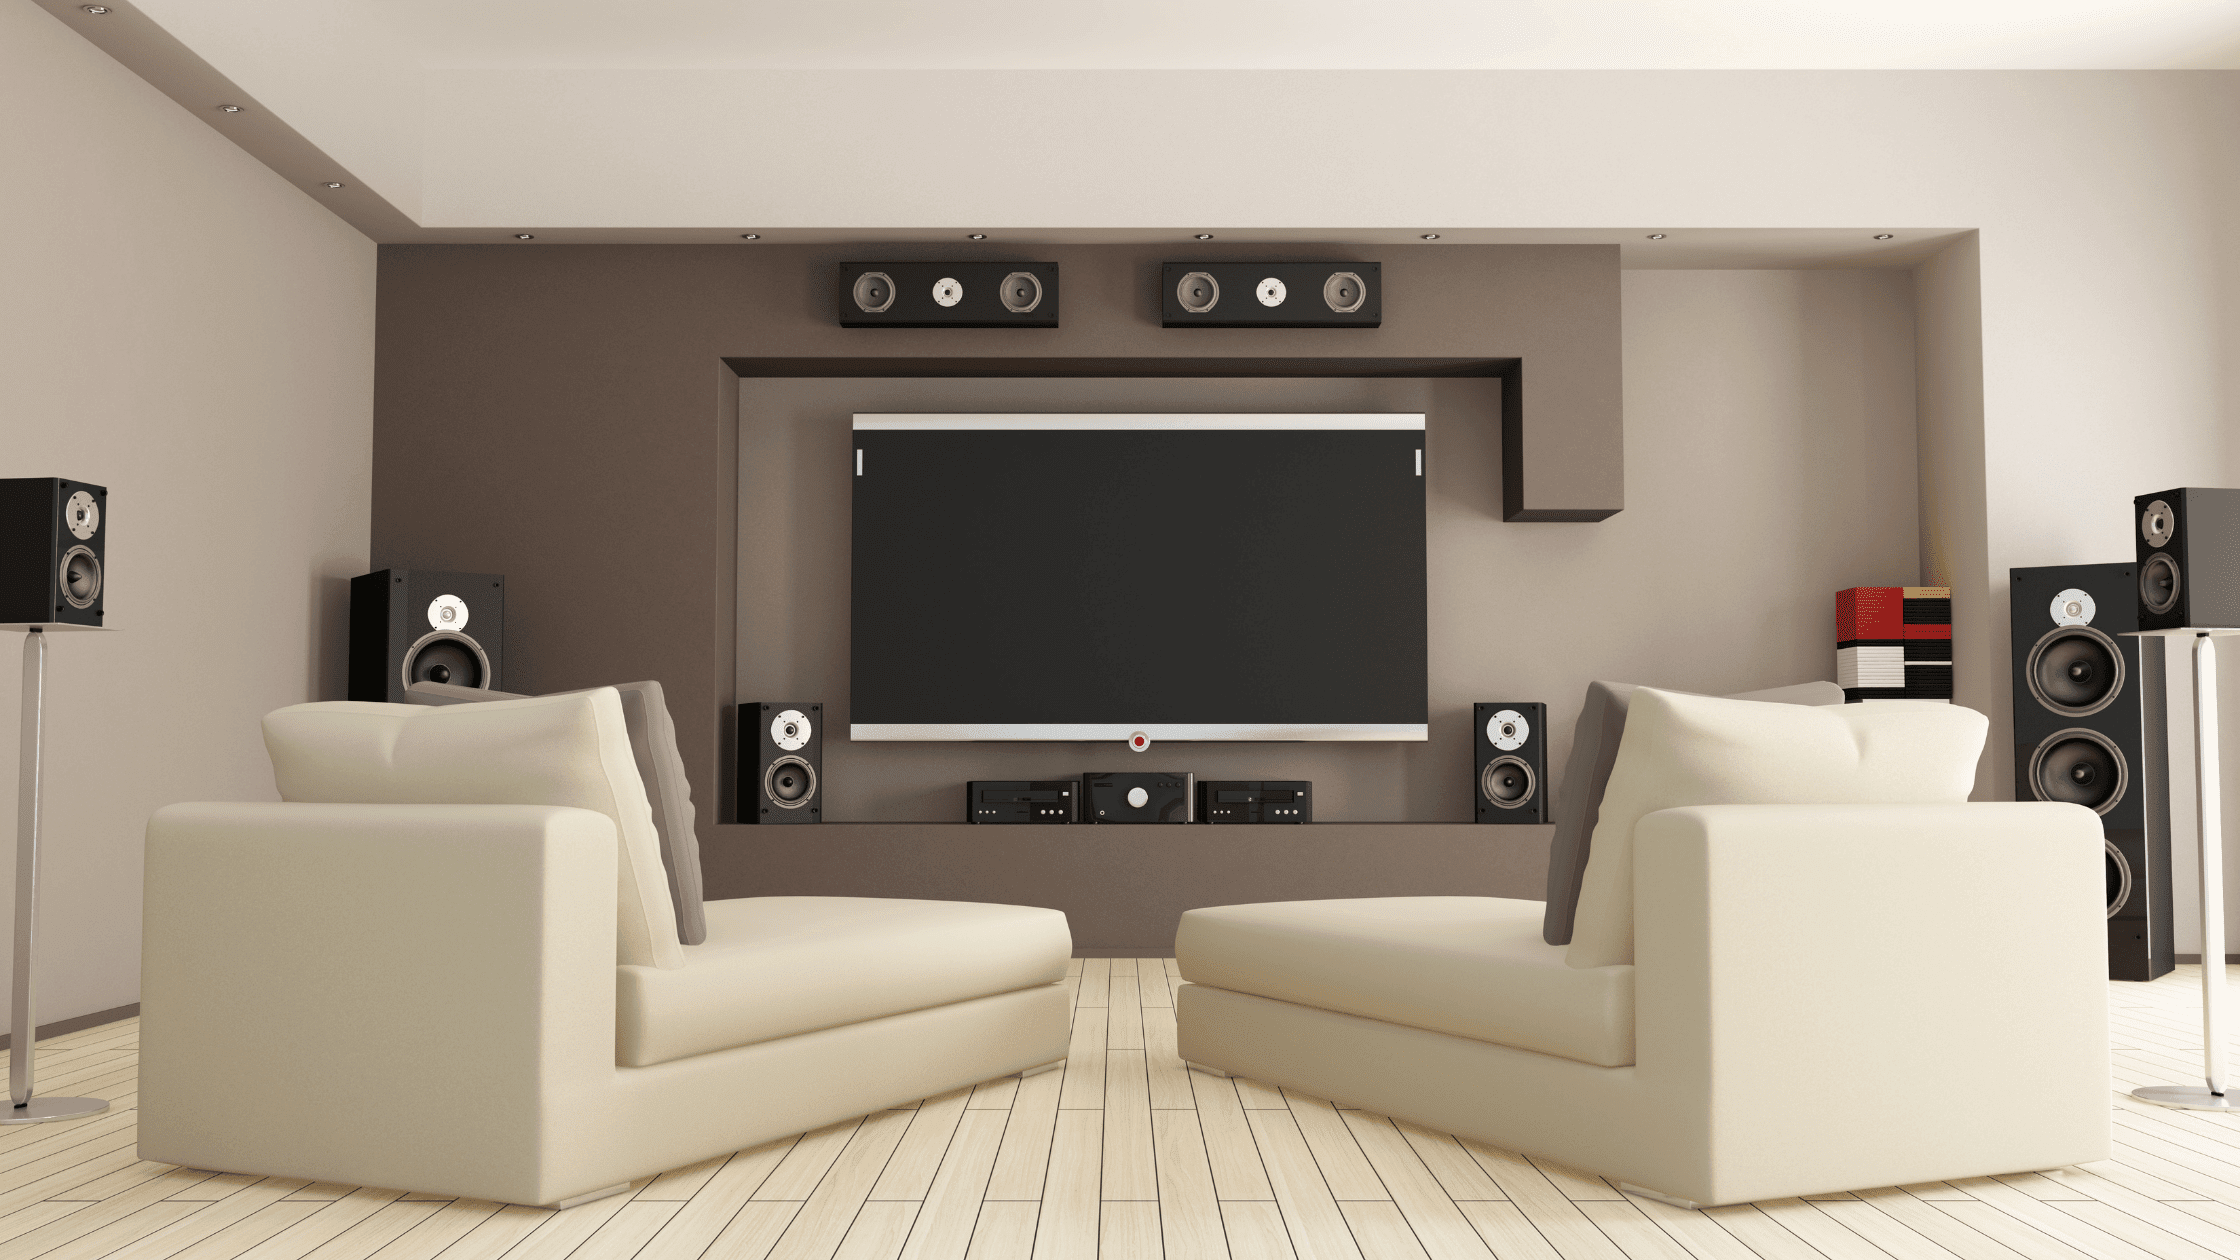 How To Soundproof Home Movie Theater Cheaply.